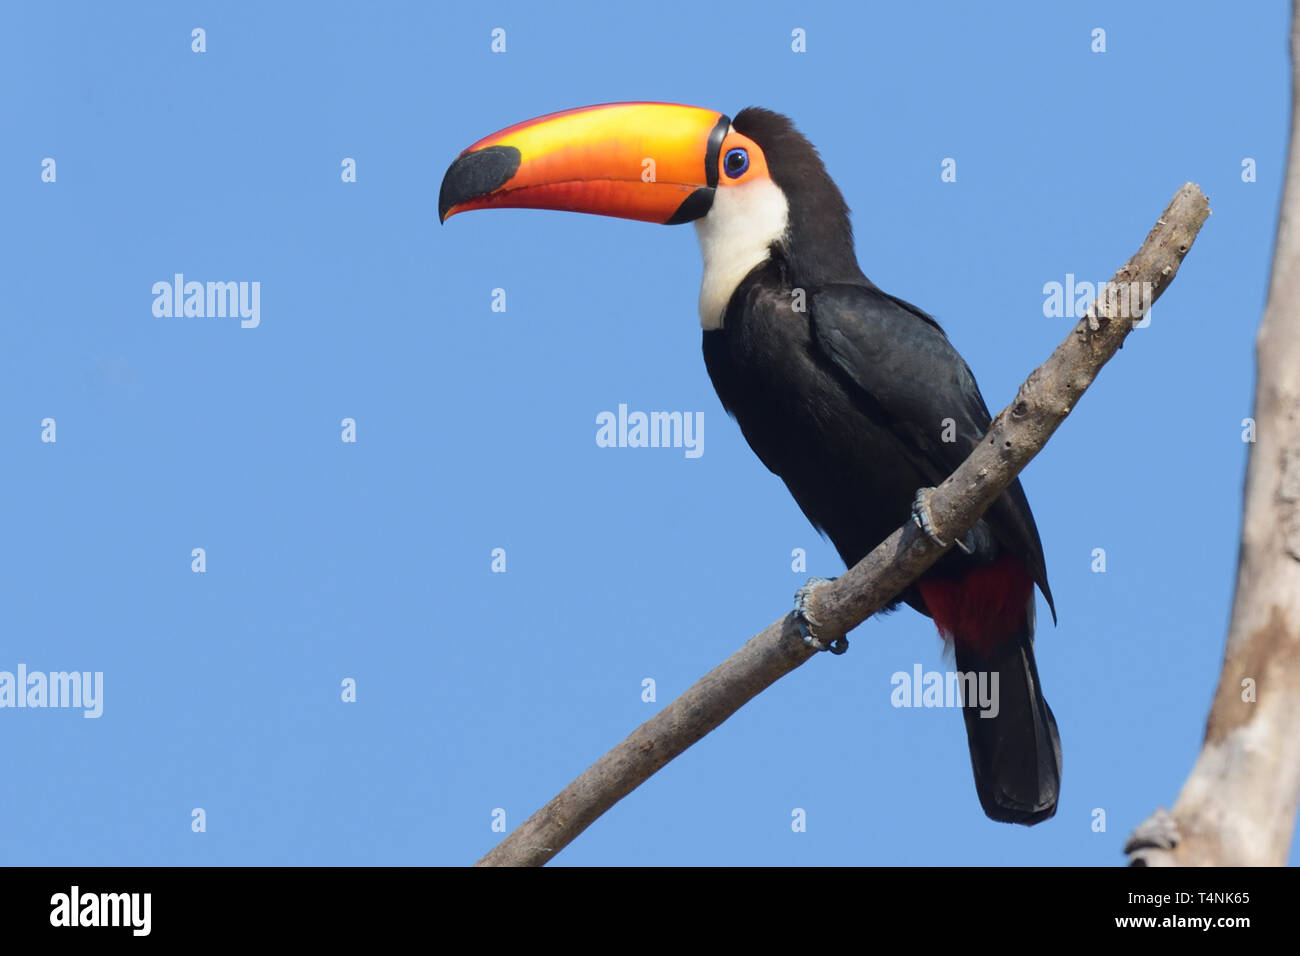 Toco Toucan (Ramphastos toco) in the Pantanal Stock Photo